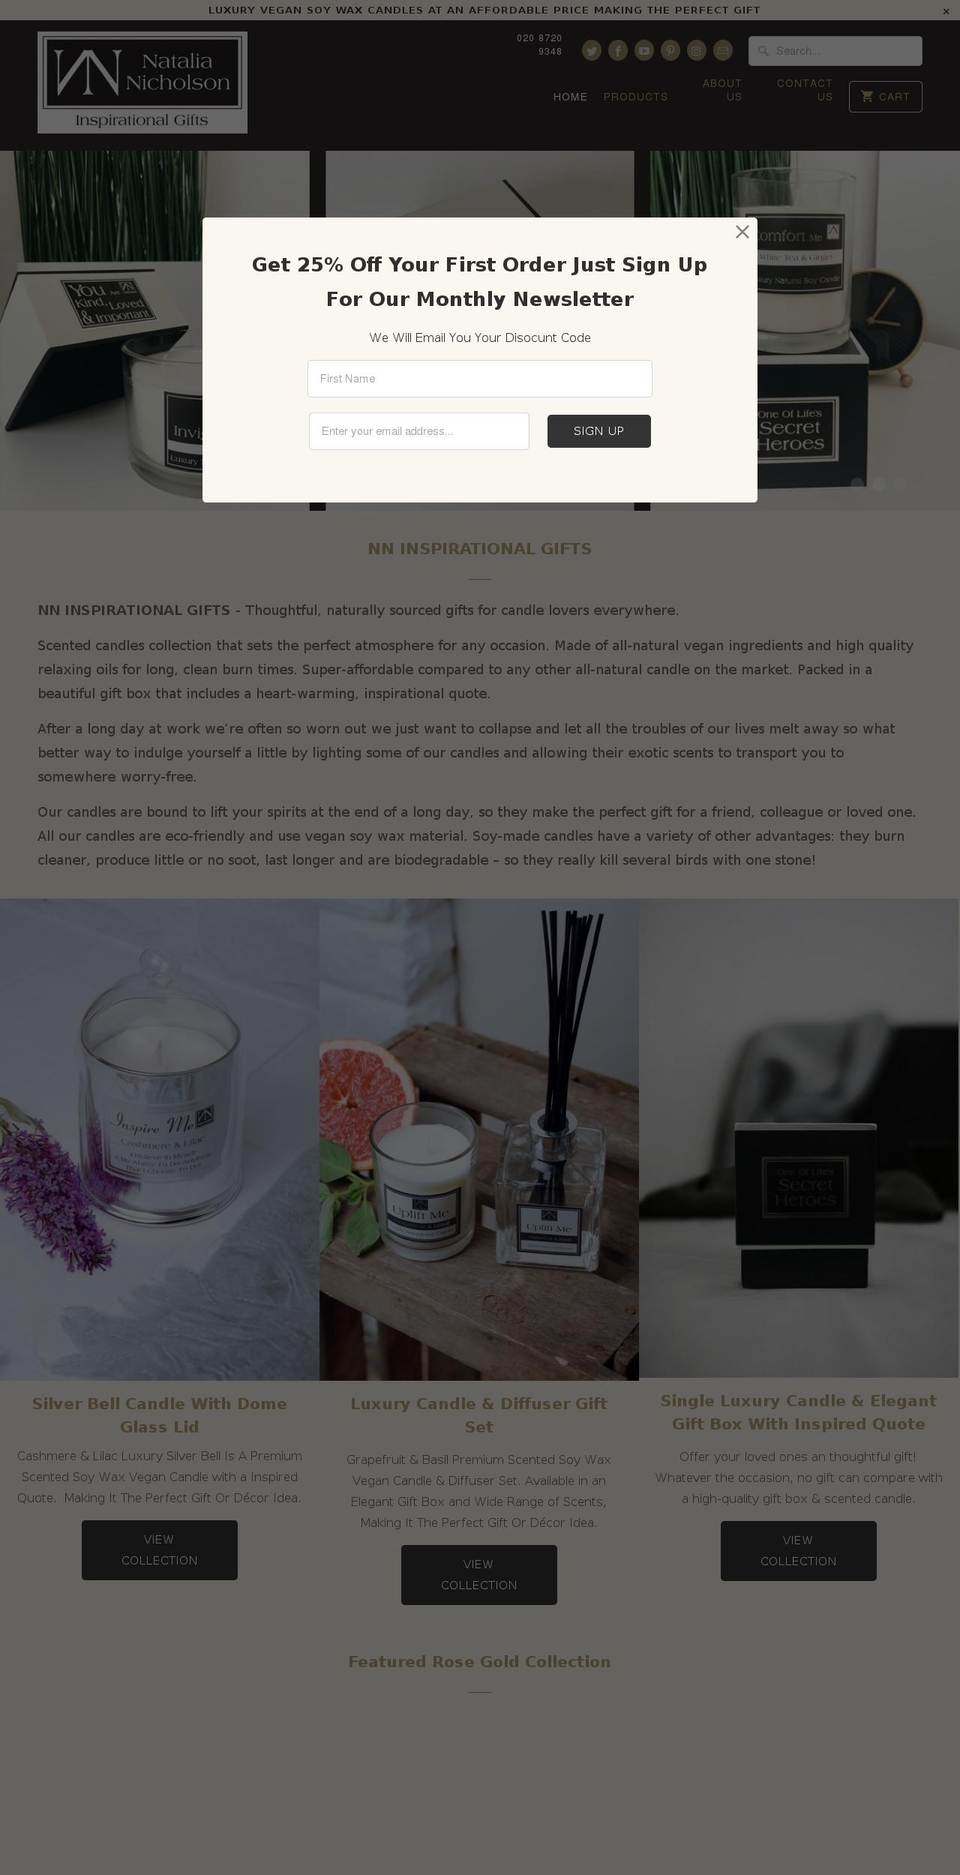 Gifts Shopify theme site example nninspirationalgifts.com